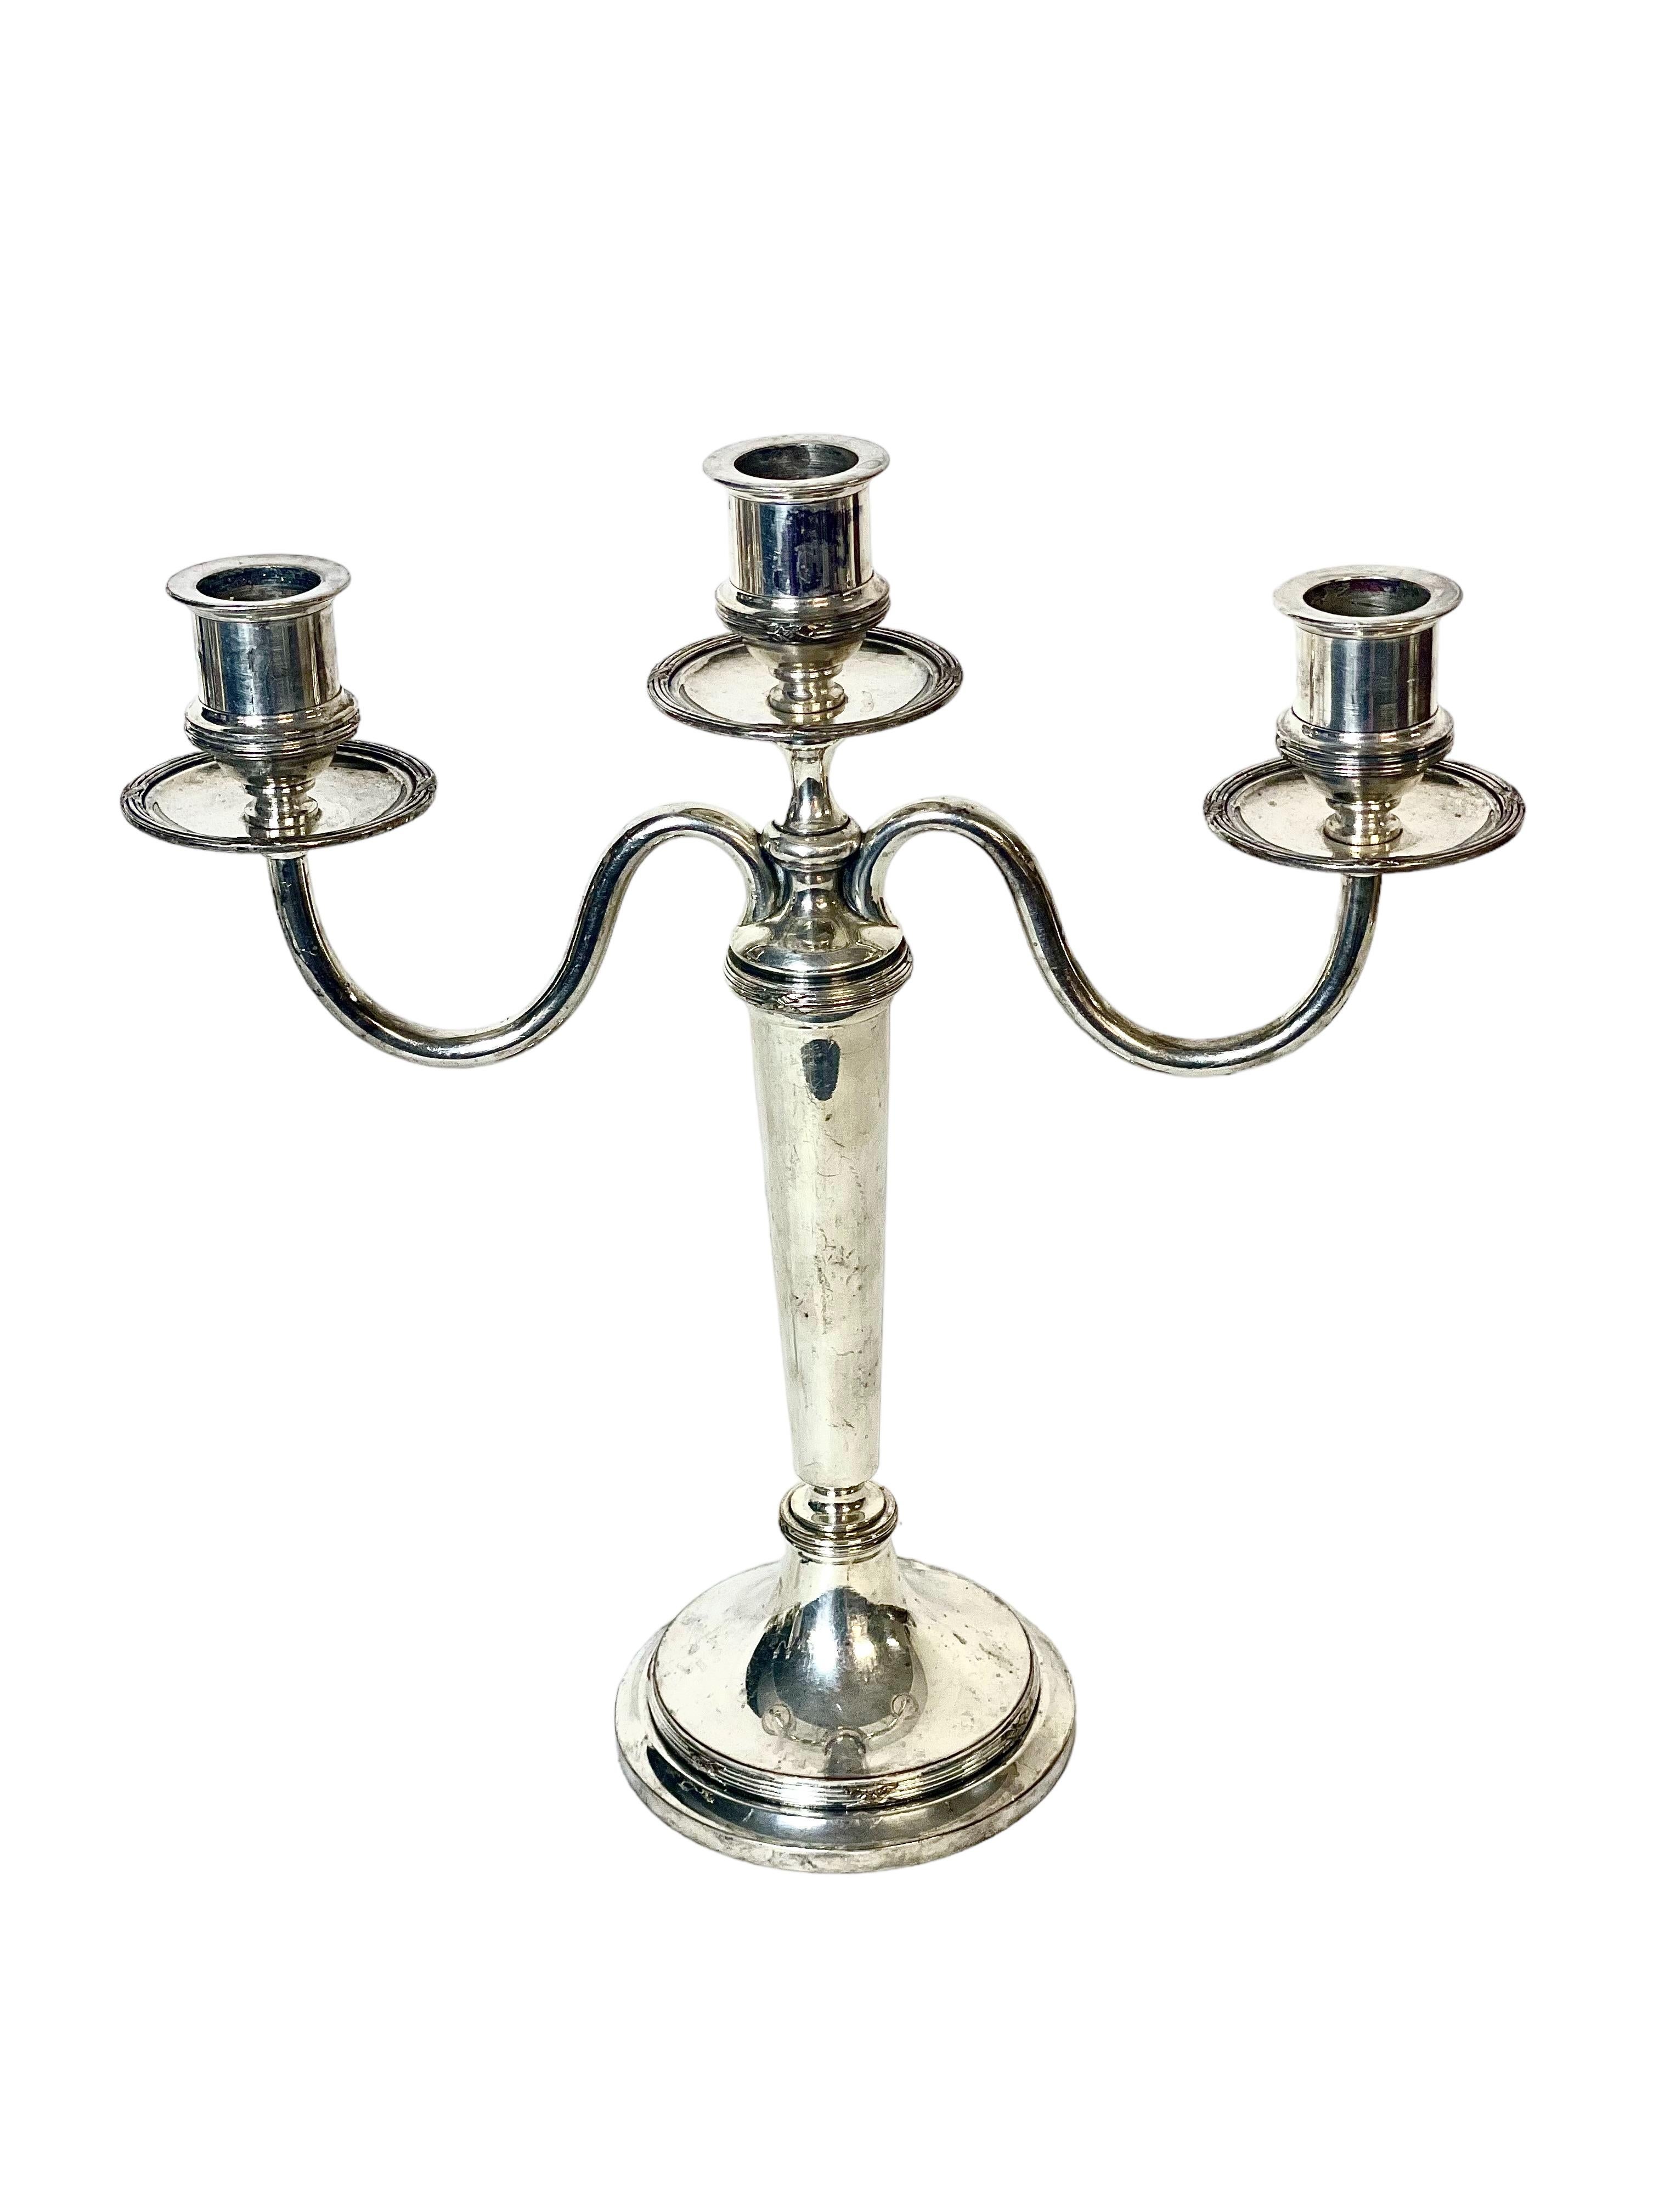 A pair of antique French three-light candelabra in silver plate, by the acclaimed silversmith Victor Saglier (1809-1894) who was known for creating beautiful pieces in ceramic, gold and silver in the Art Nouveau style of the late 19th century.